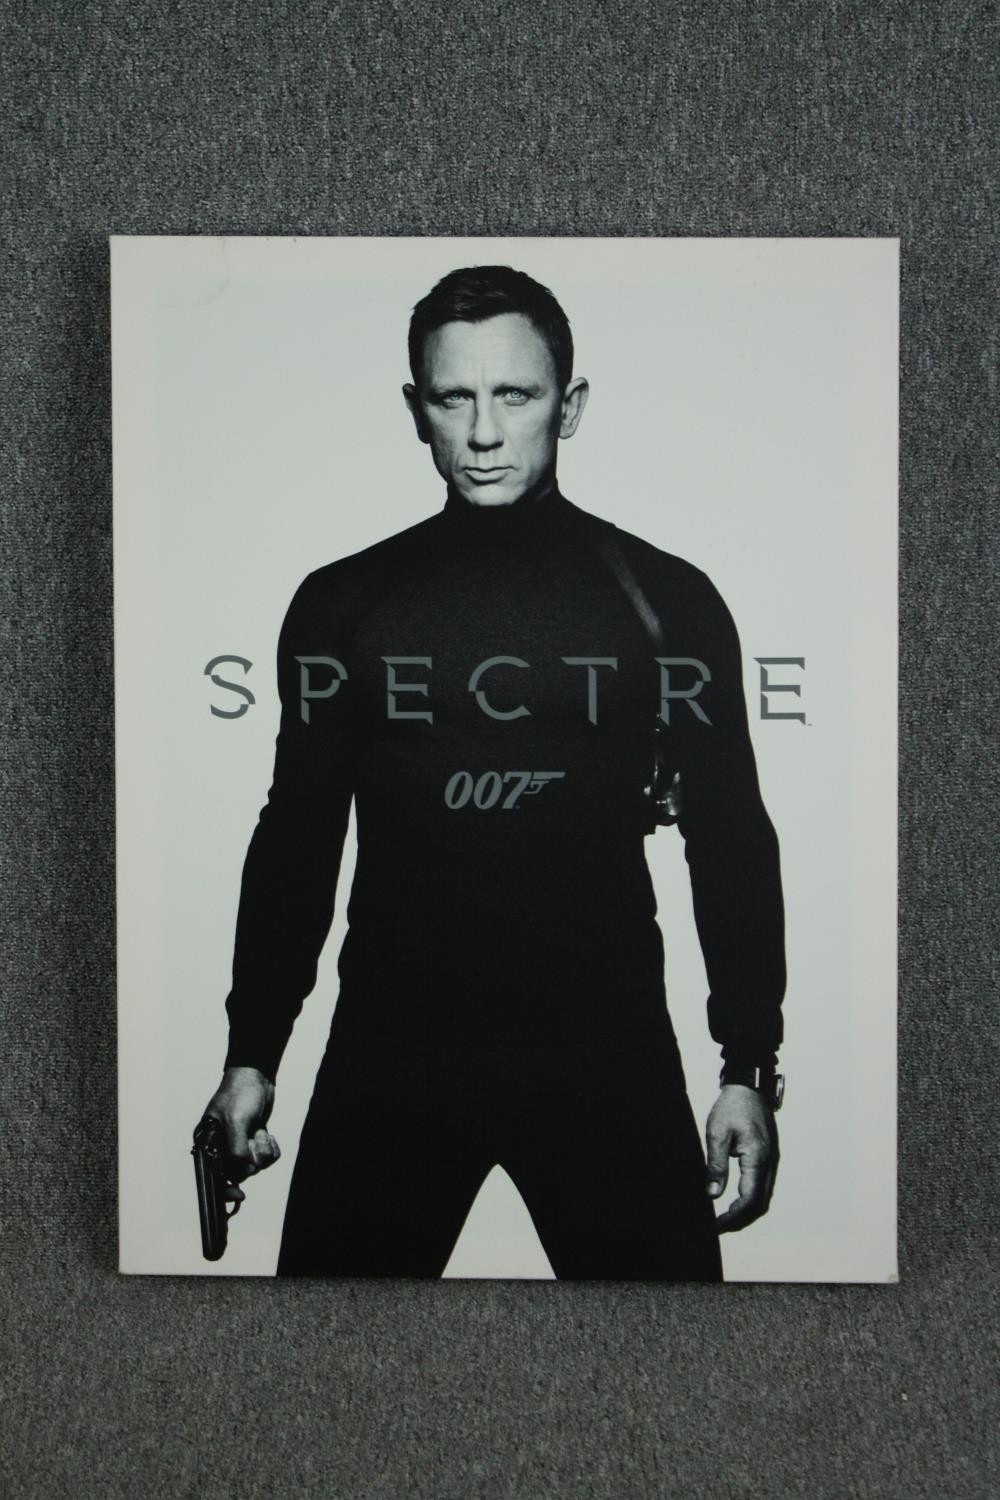 James Bond, Spectre. Movie poster printed onto stretched canvas. H.81 W.60cm. (each) - Image 2 of 3